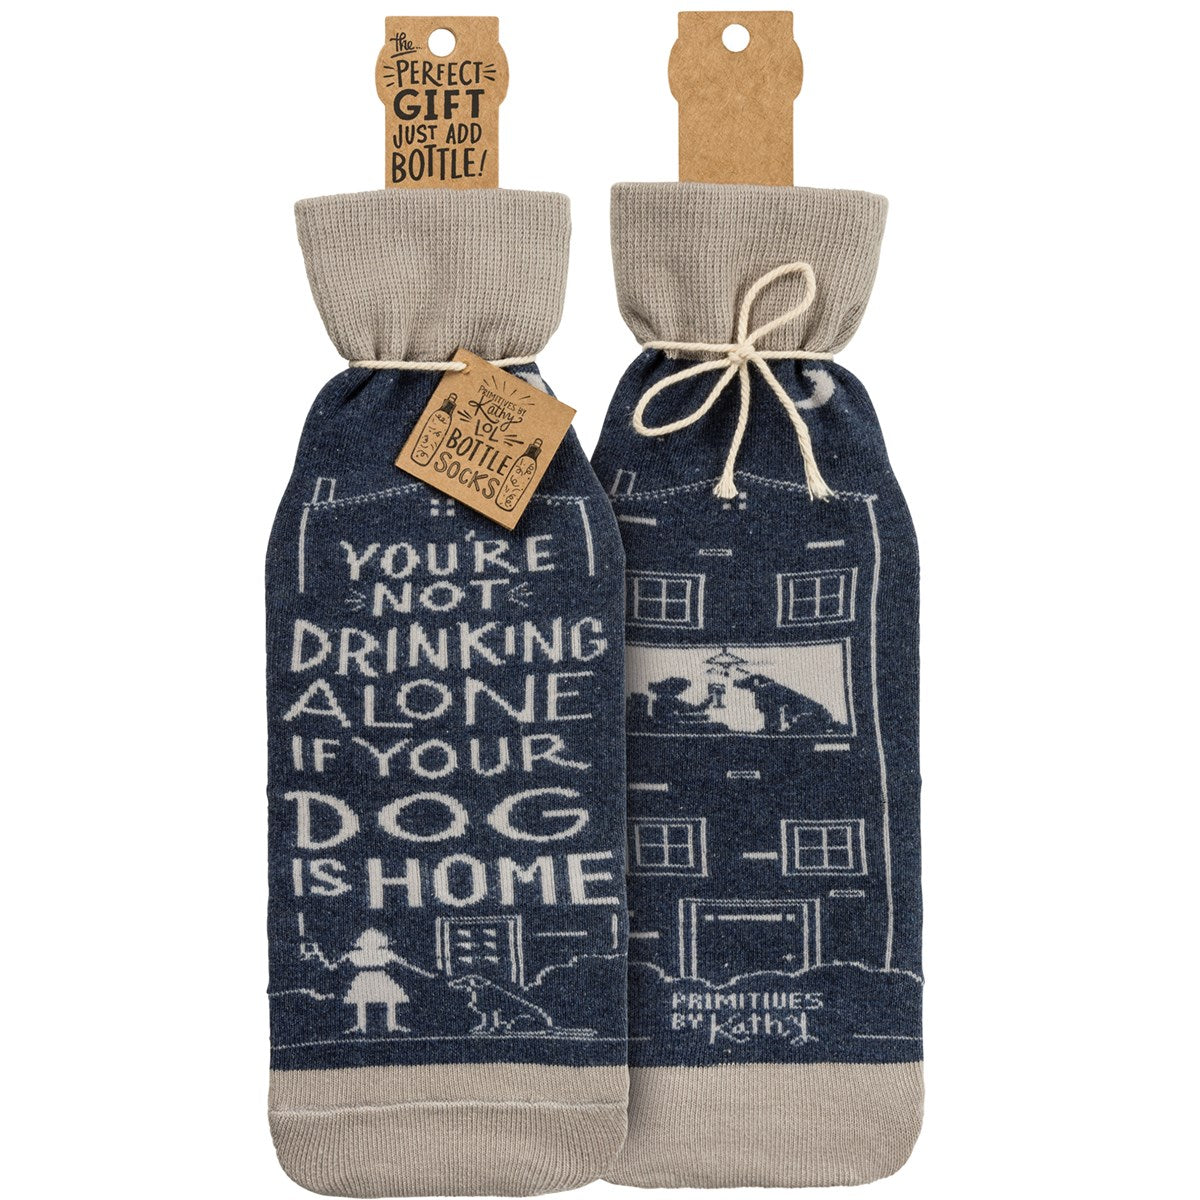 Not Drinking Alone If Dog Home Bottle Sock